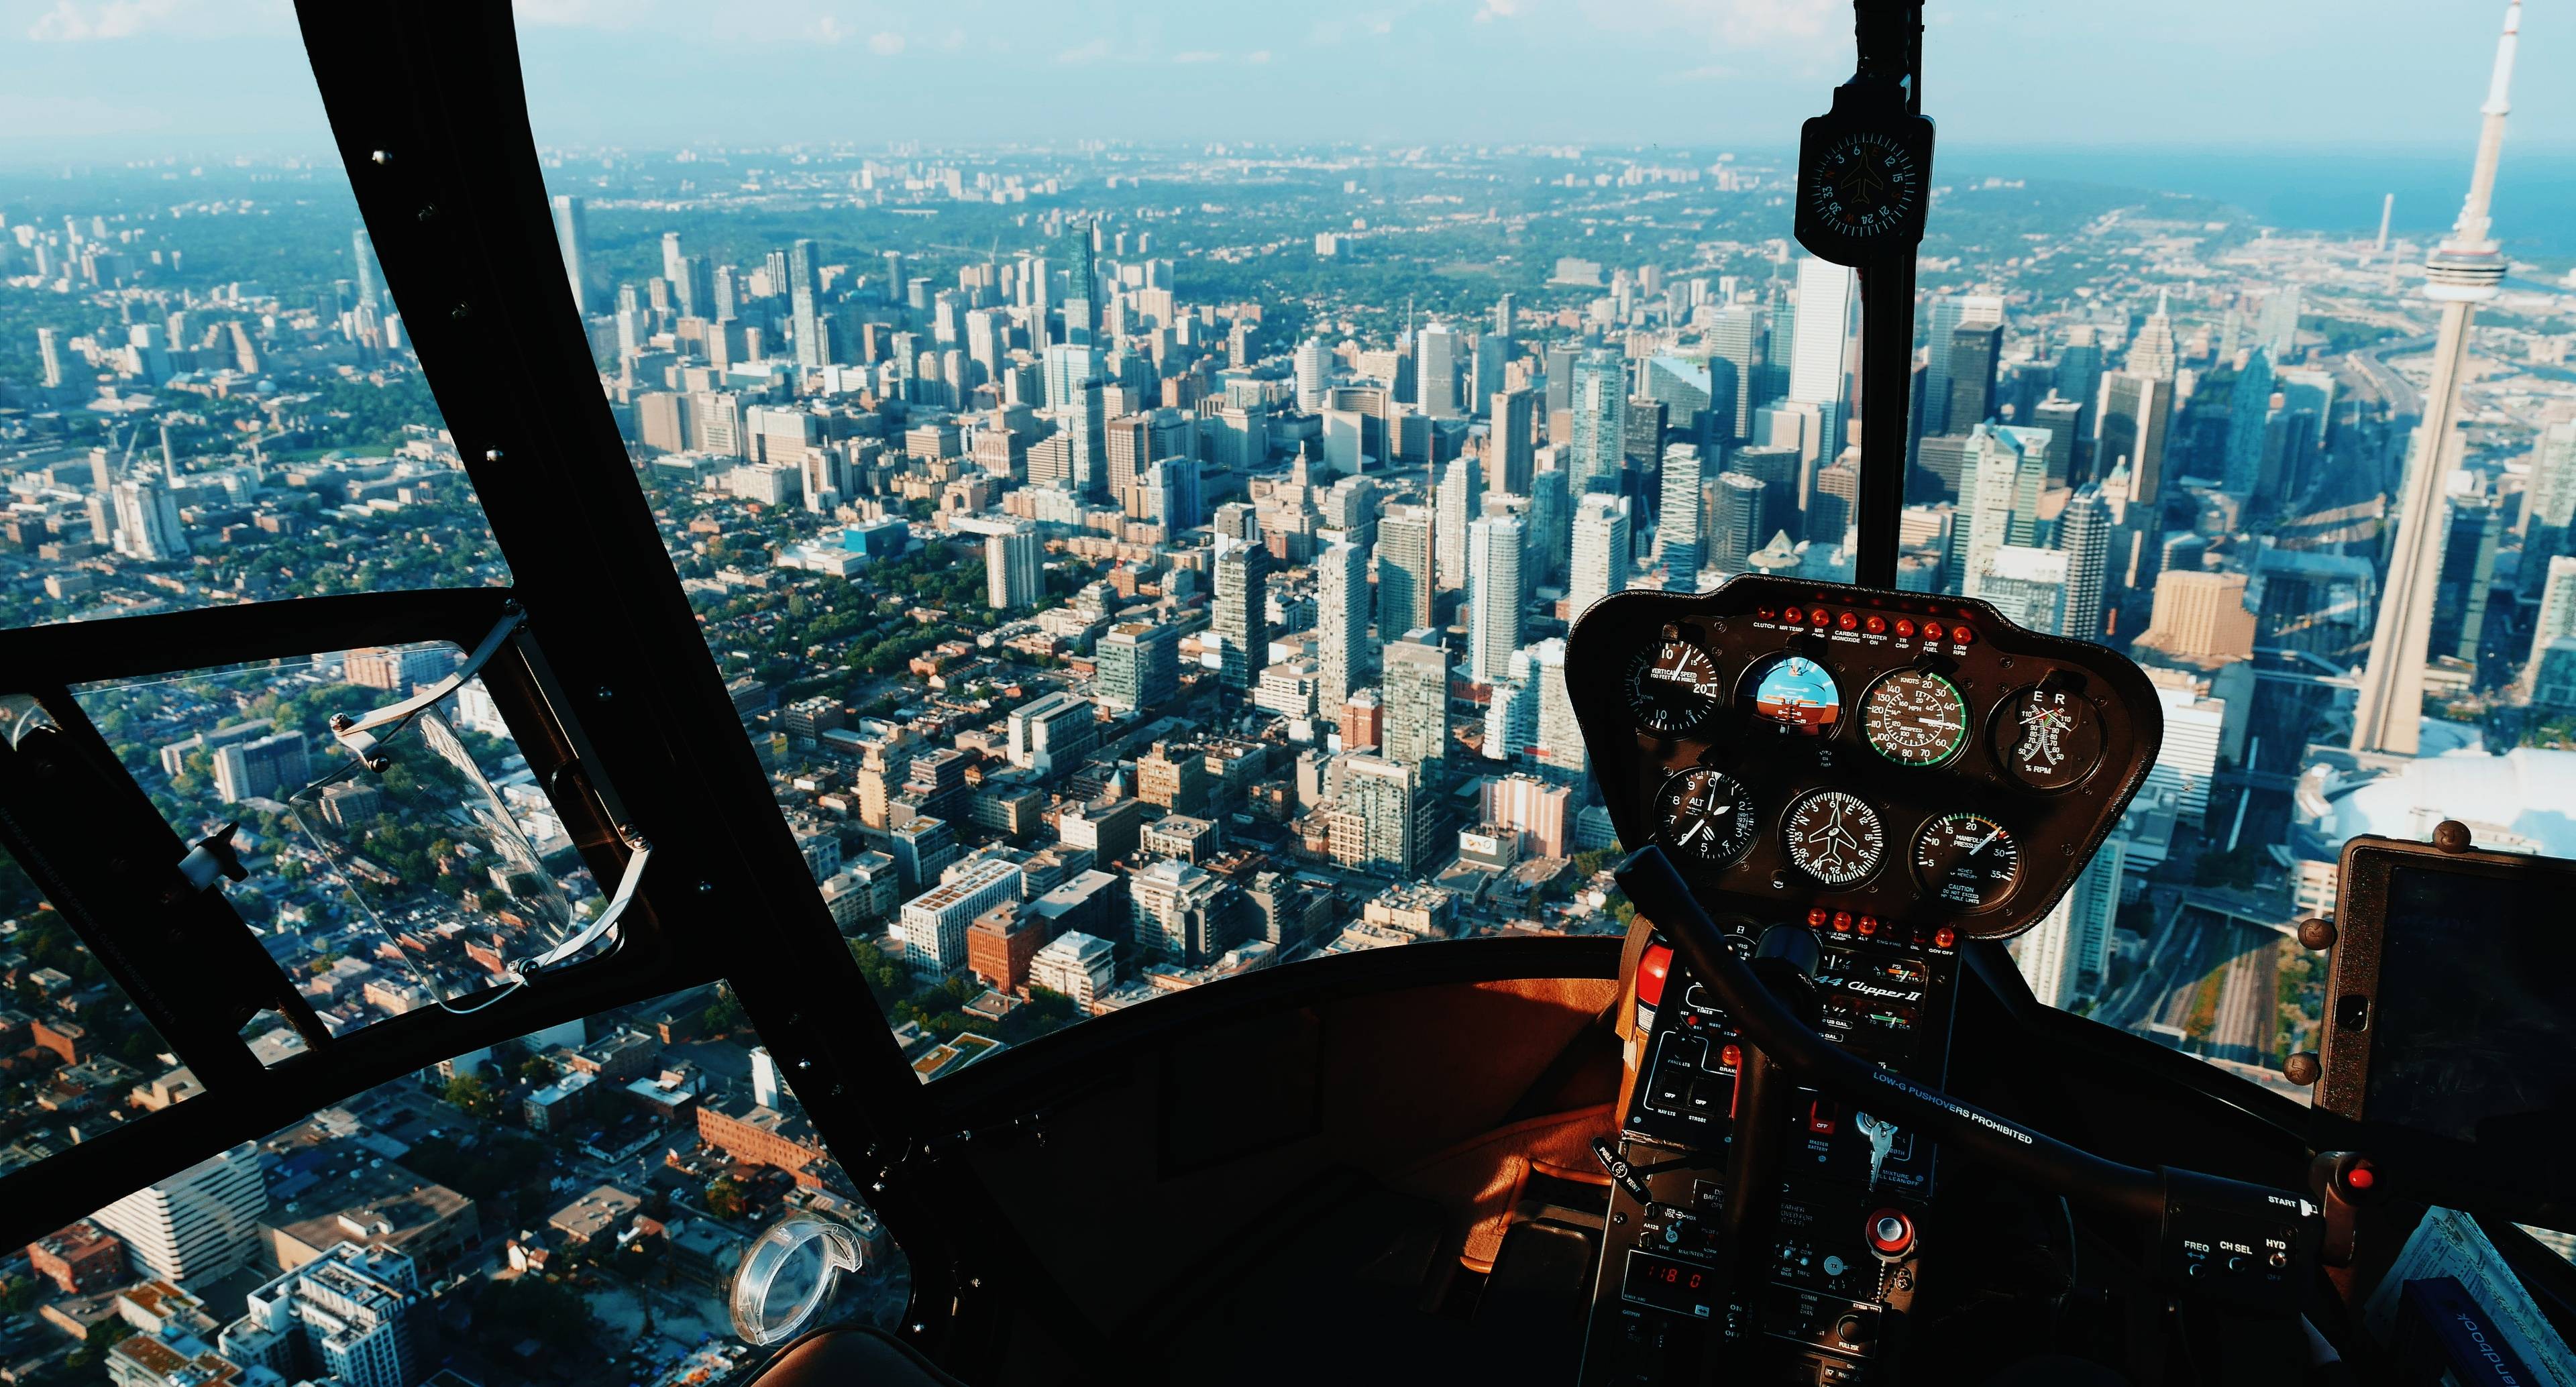 City Skies and Flying High in Toronto